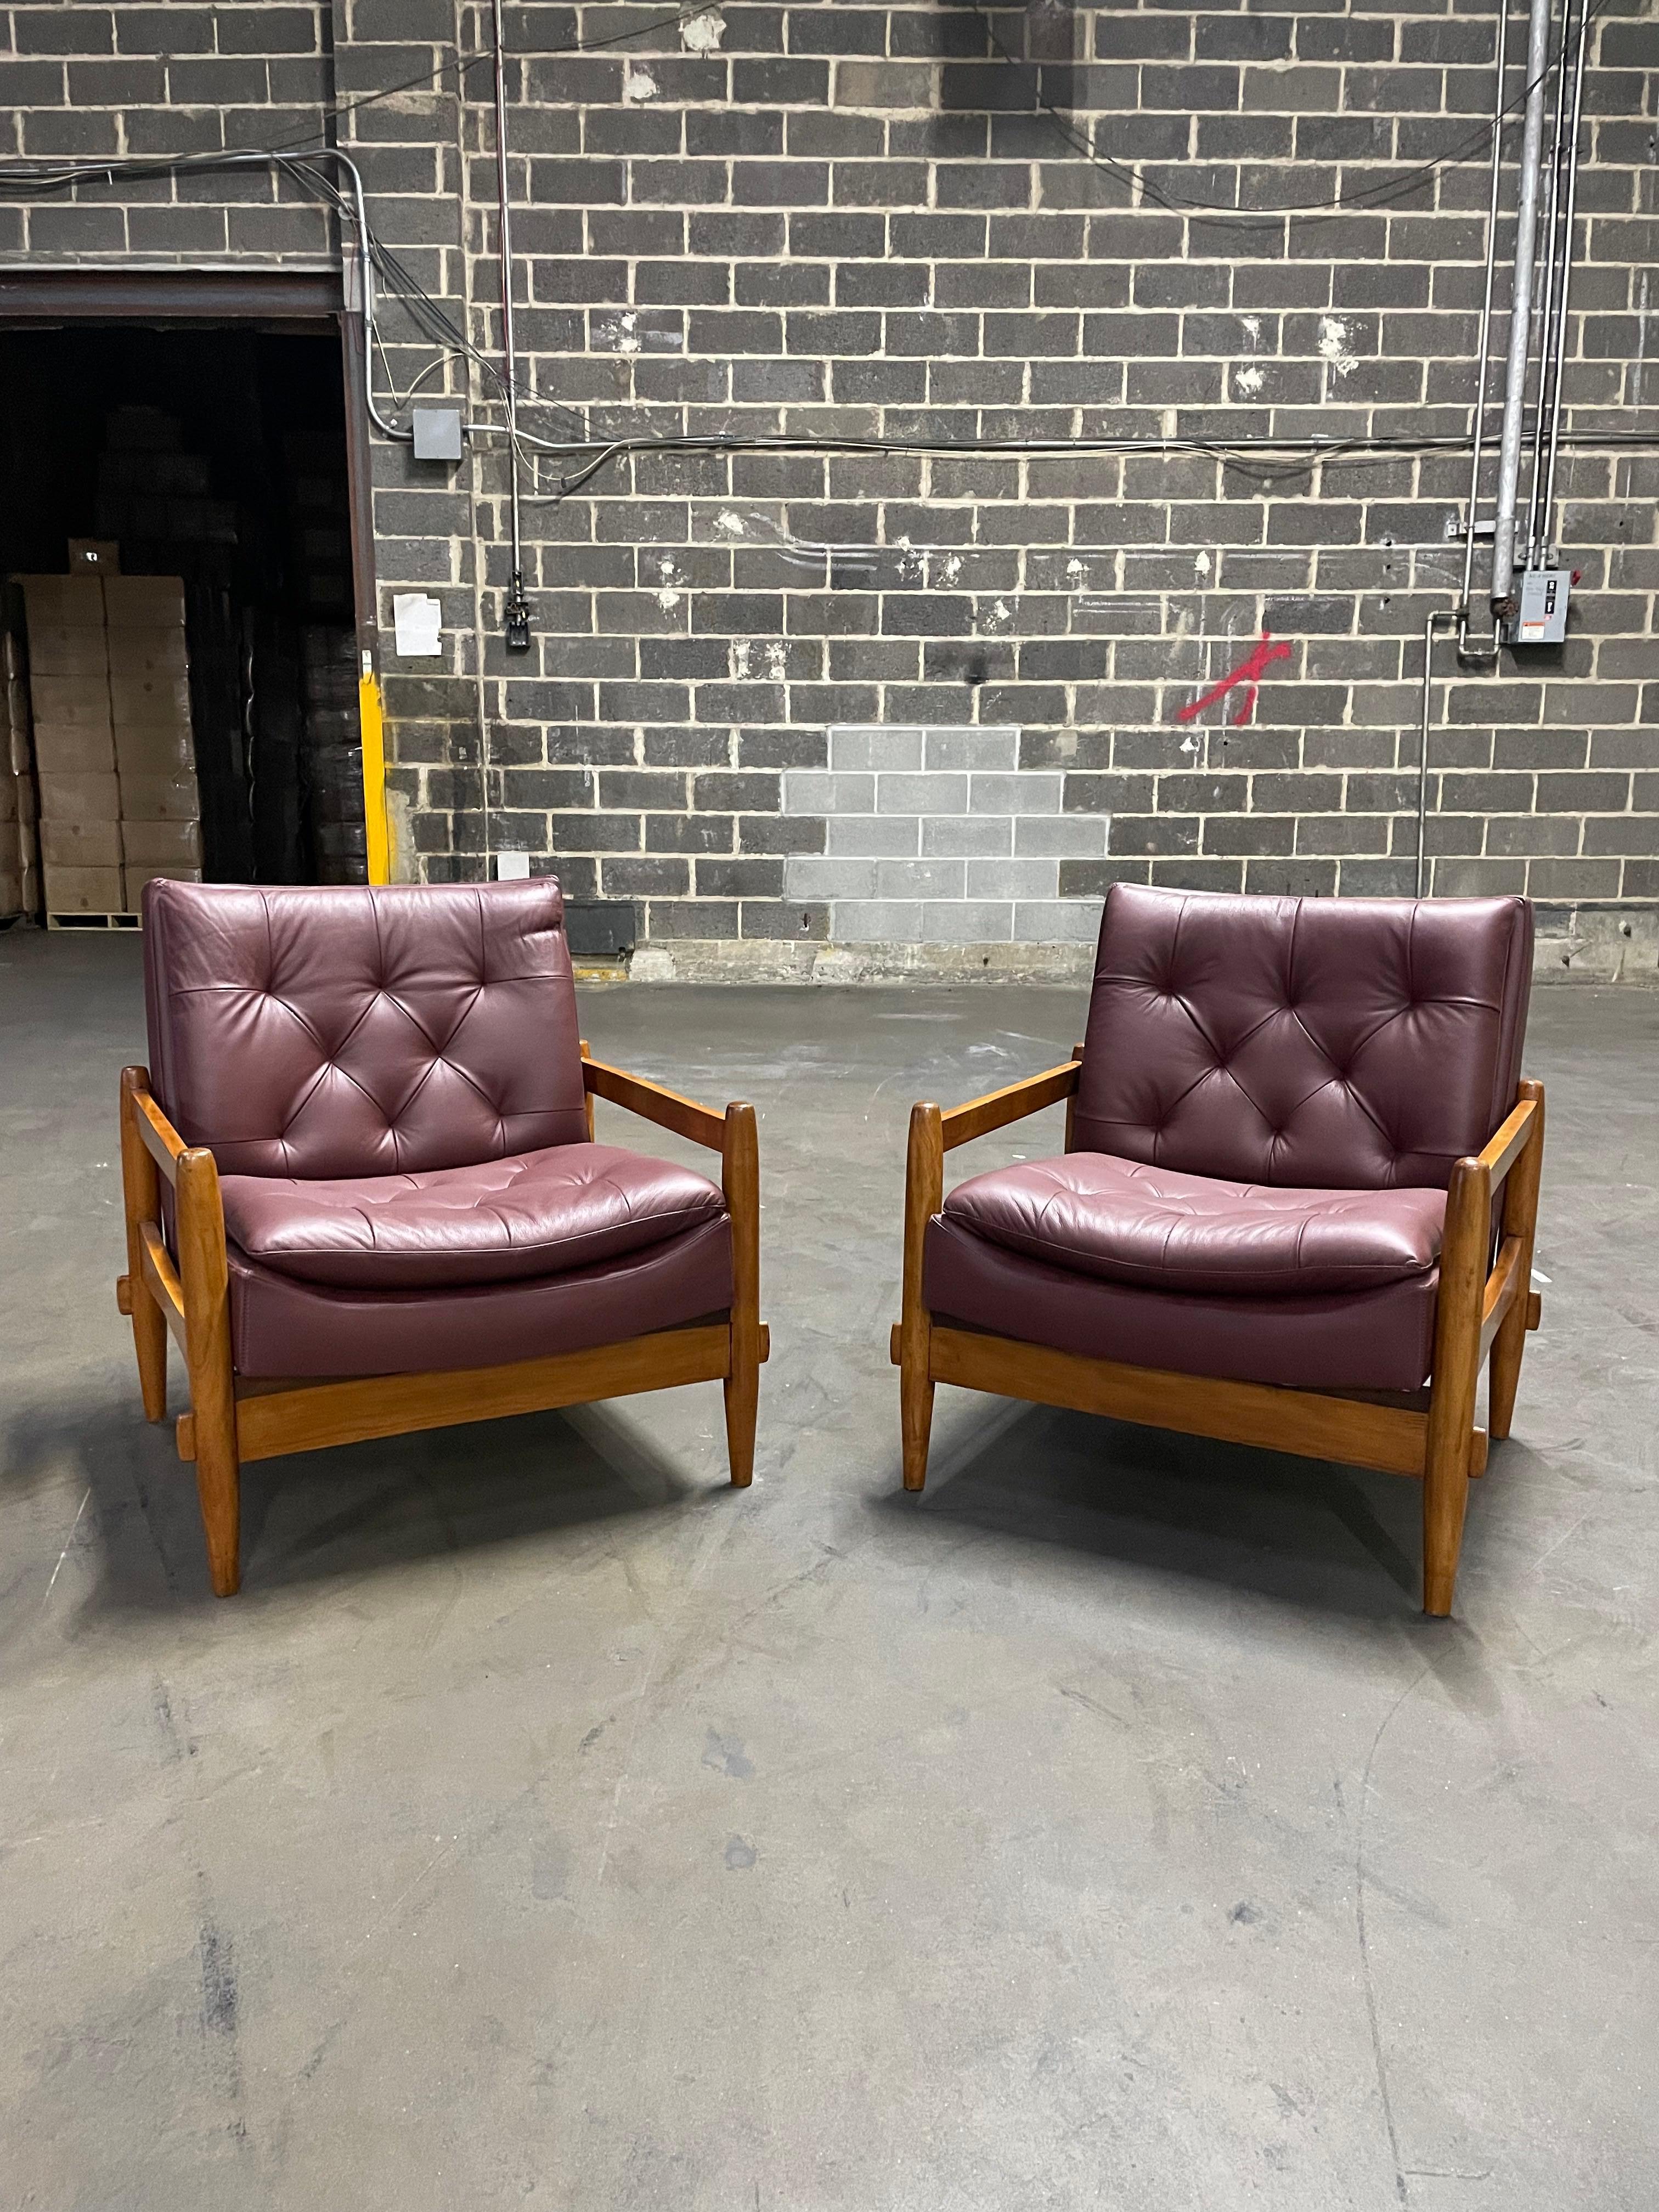 Available now, this super comfortable and visually striking pair of armchairs are made of a solid hardwood frame and purple leather upholstery with buttons in the backrest.

These armchairs have been re-upholstered by some of the best upholsterers